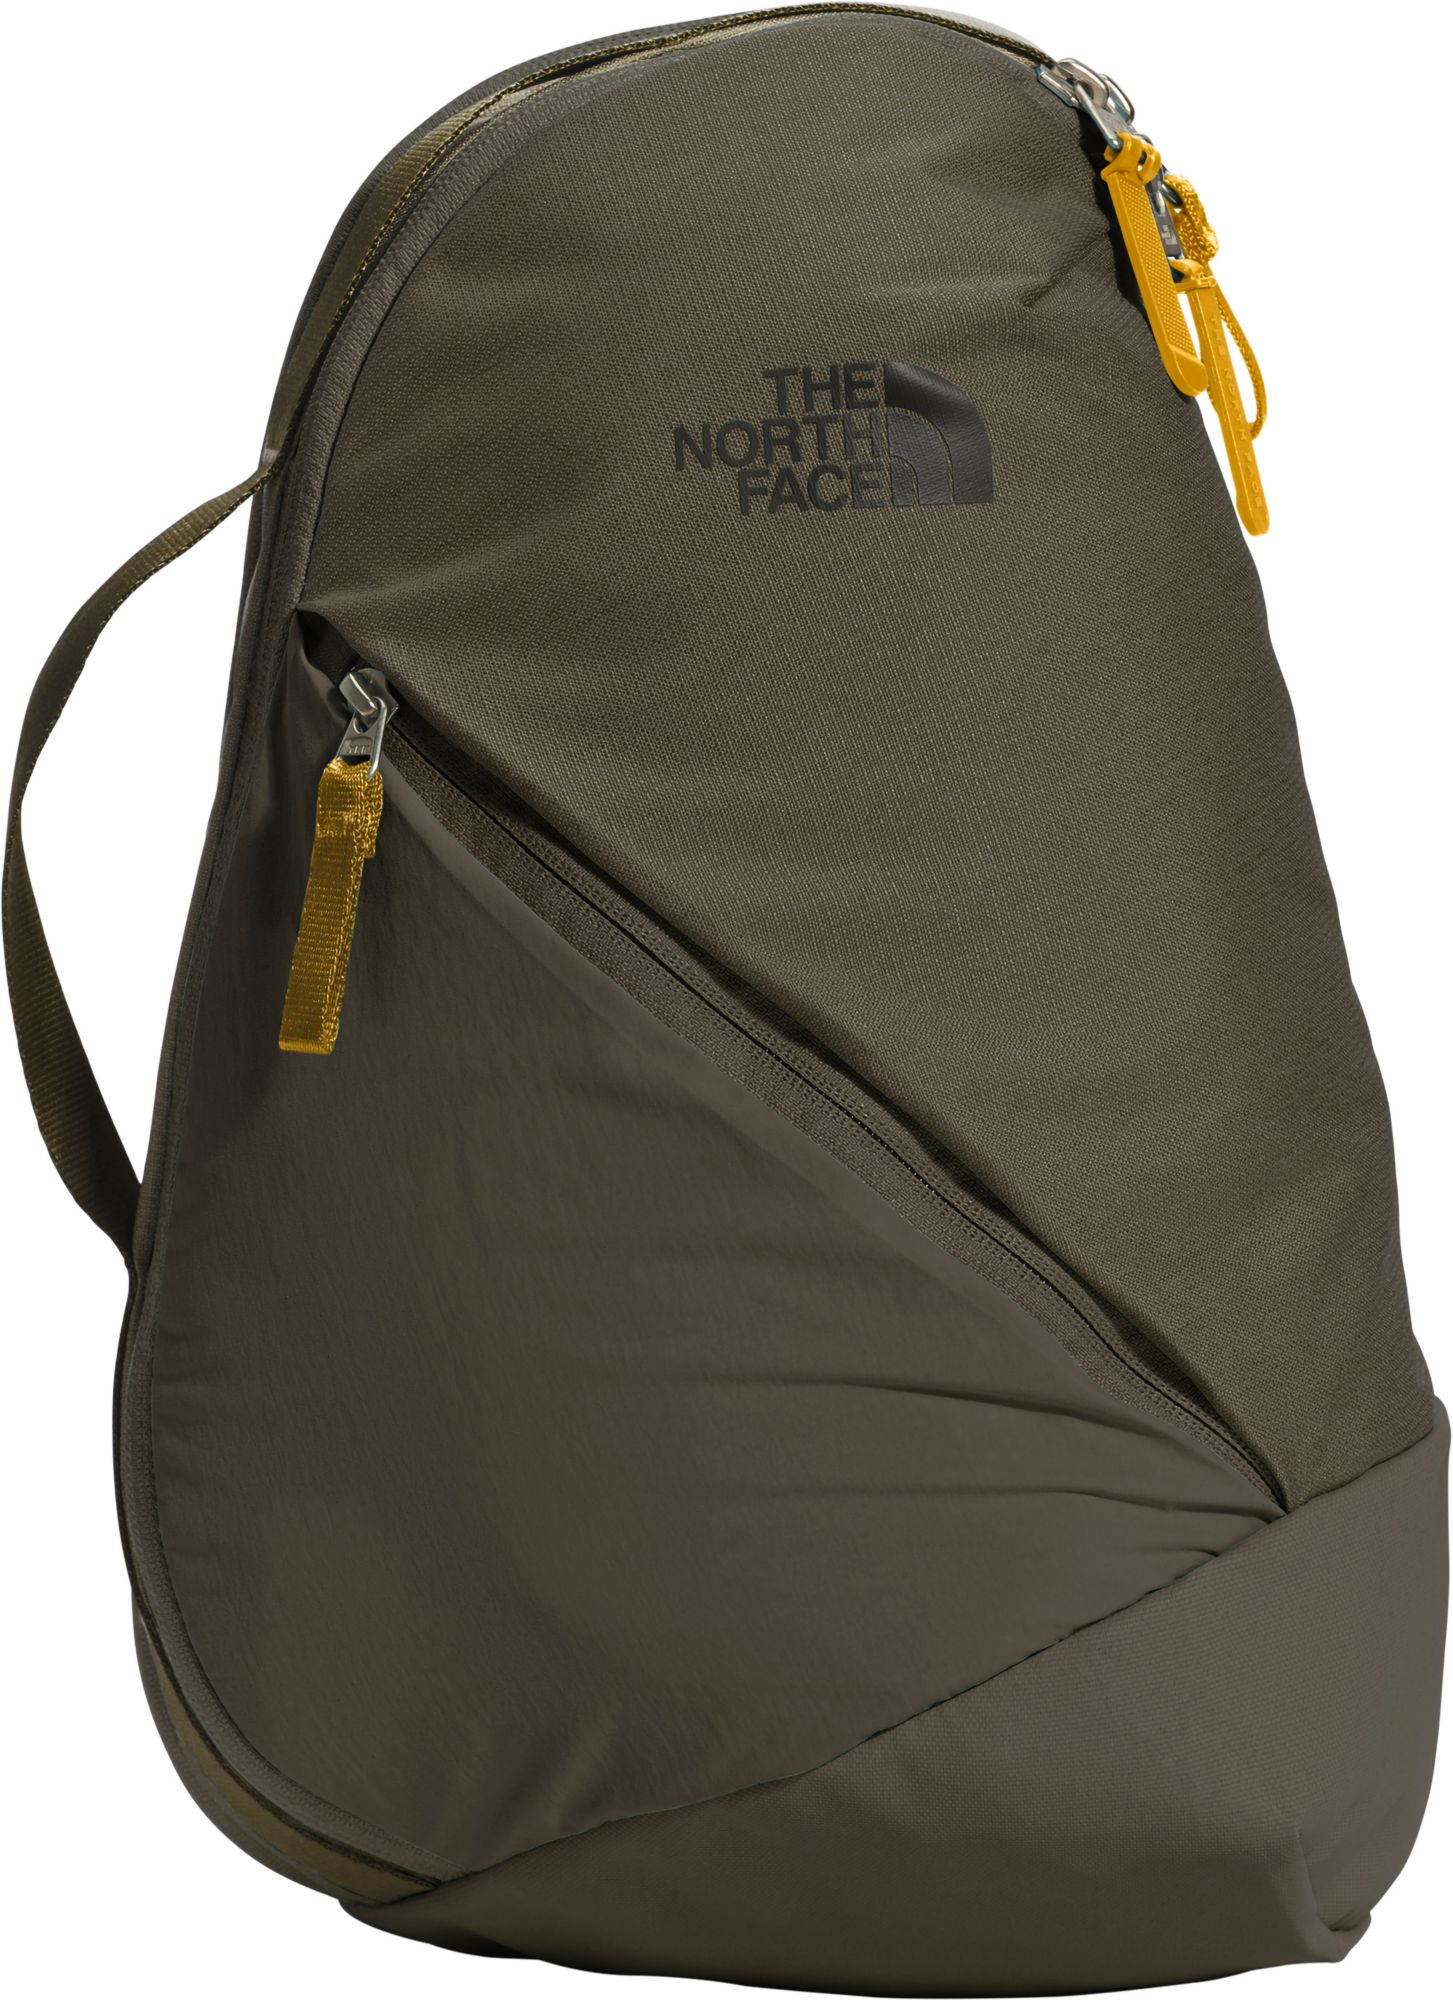 The North Face Women's Isabella Sling Bag, New Taupe Green Heather